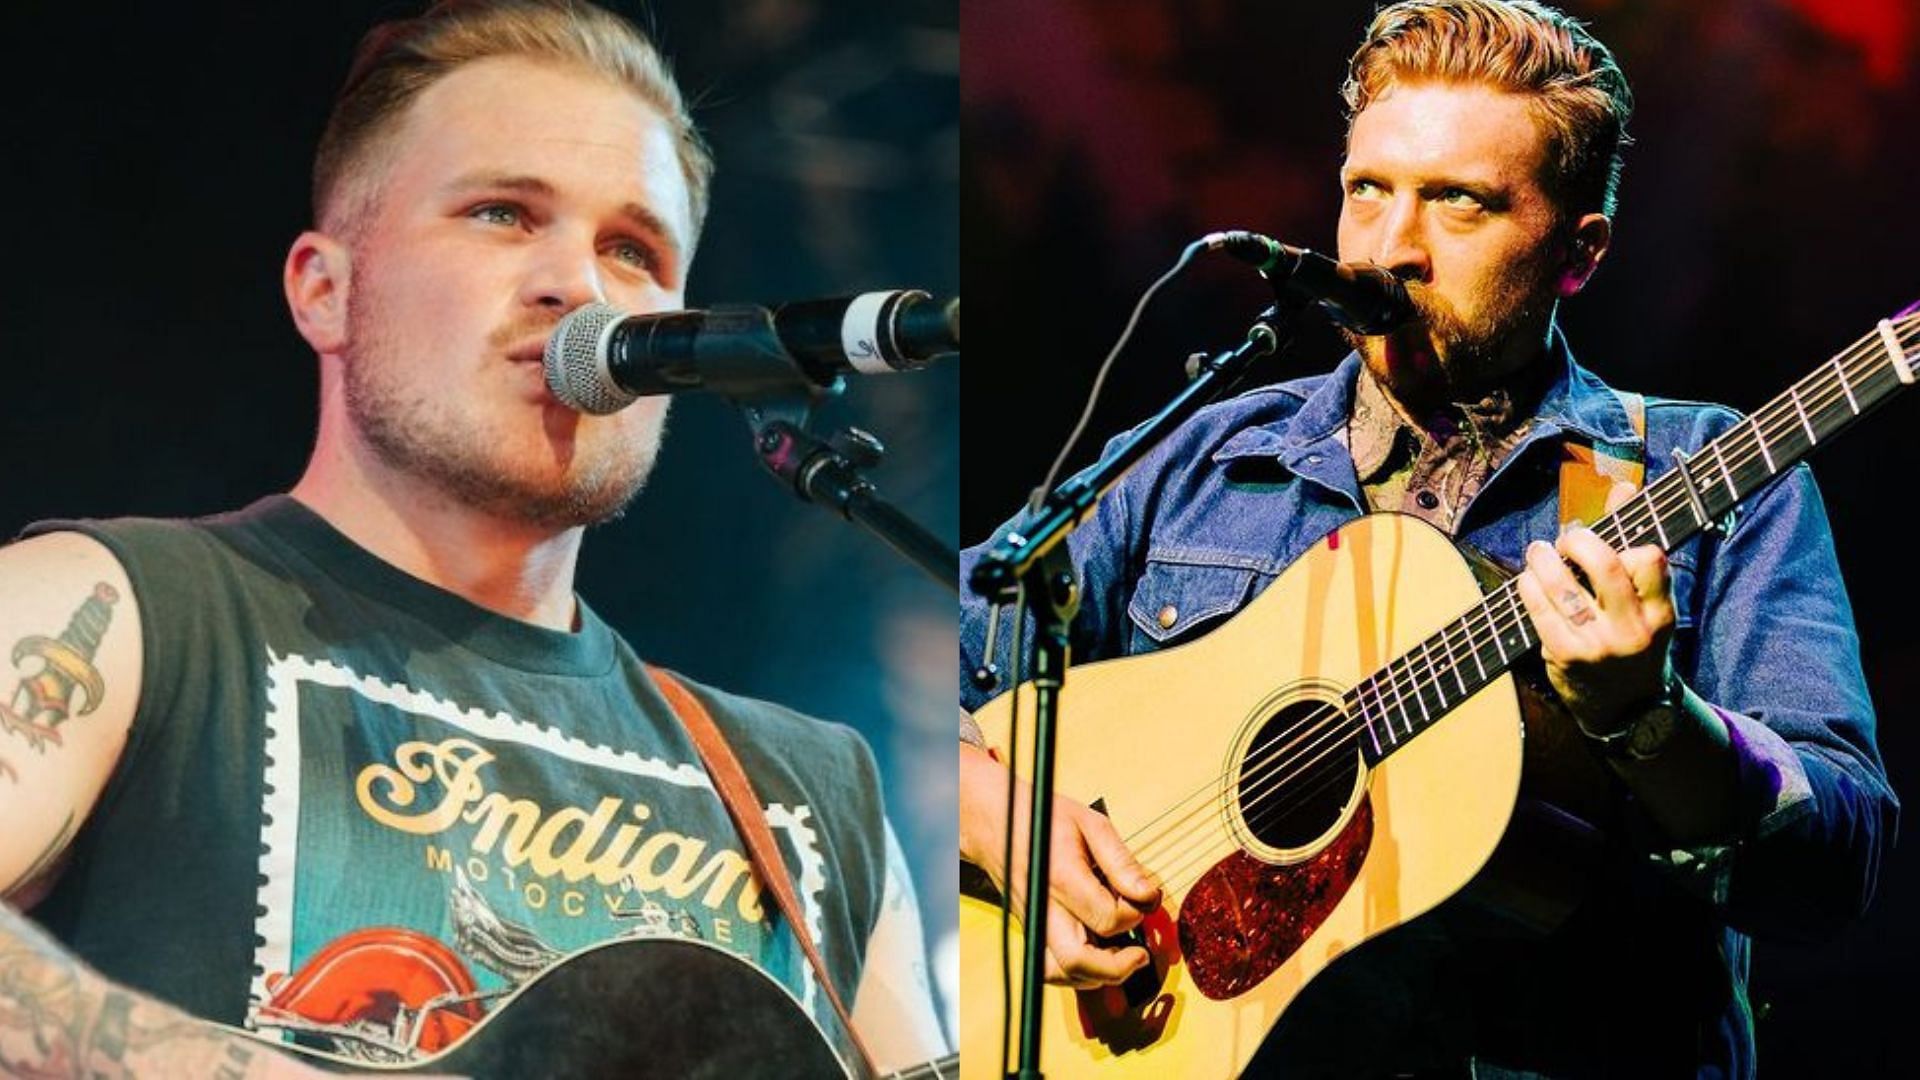 Two Step Inn Festival lineup including Zach Bryan and Tyler Childers (Image via Getty and Instagram/ @timmytychilders)